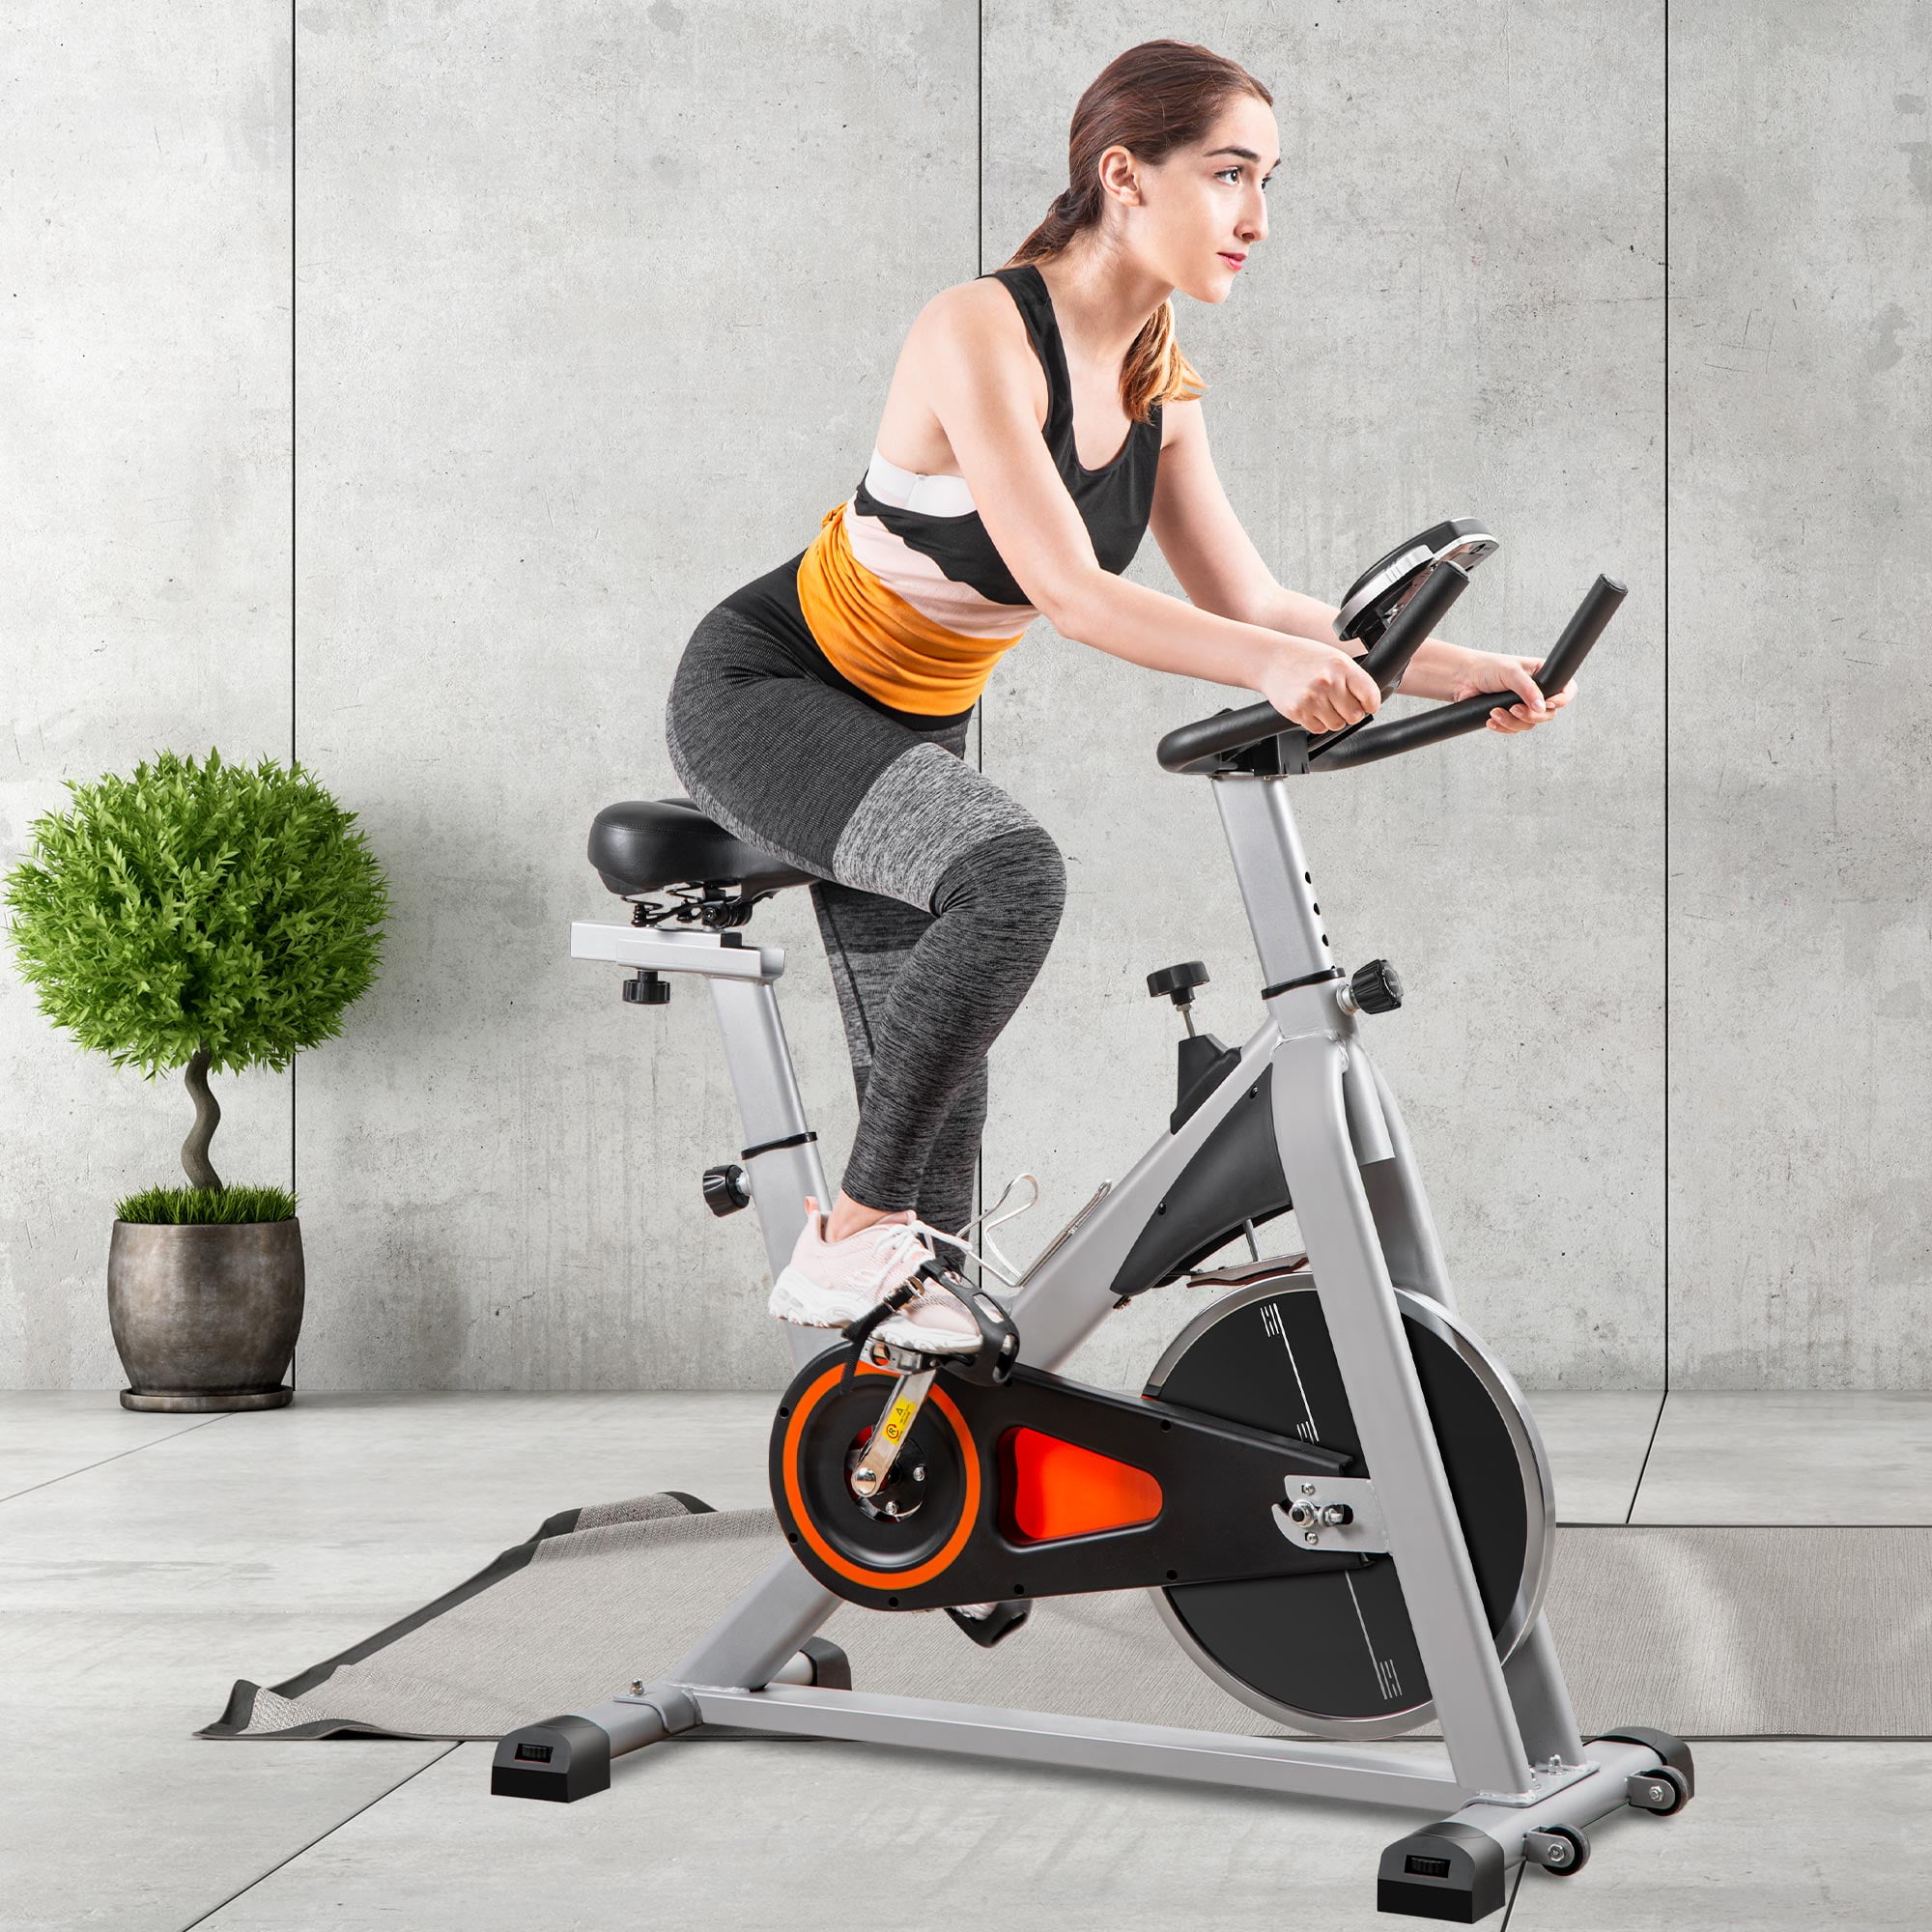 Details about   Pro Stationary Exercise Bike Bicycle Trainer Fitness Cardio Cycling Training NEW 